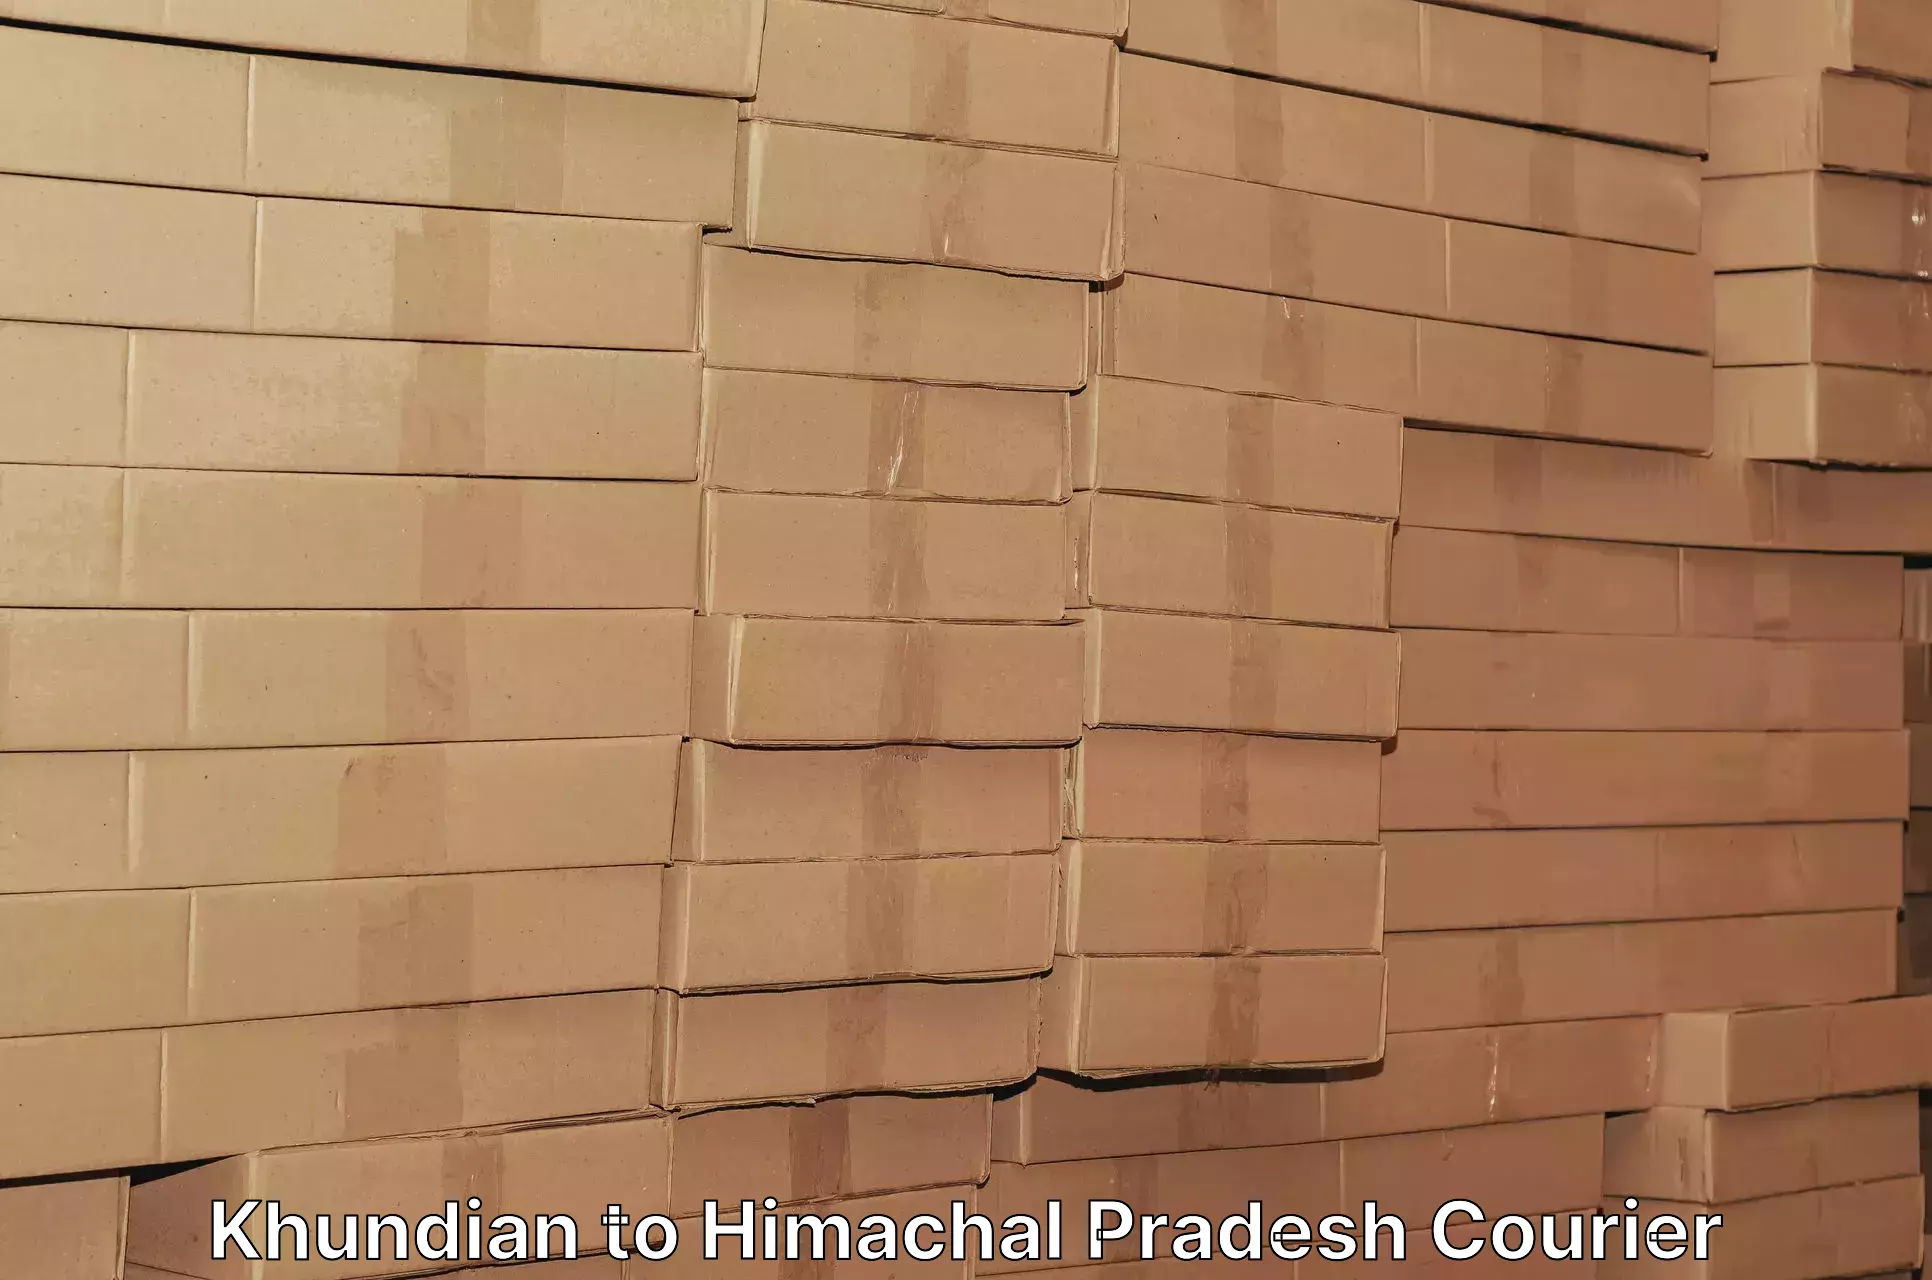 Courier service booking Khundian to Himachal Pradesh